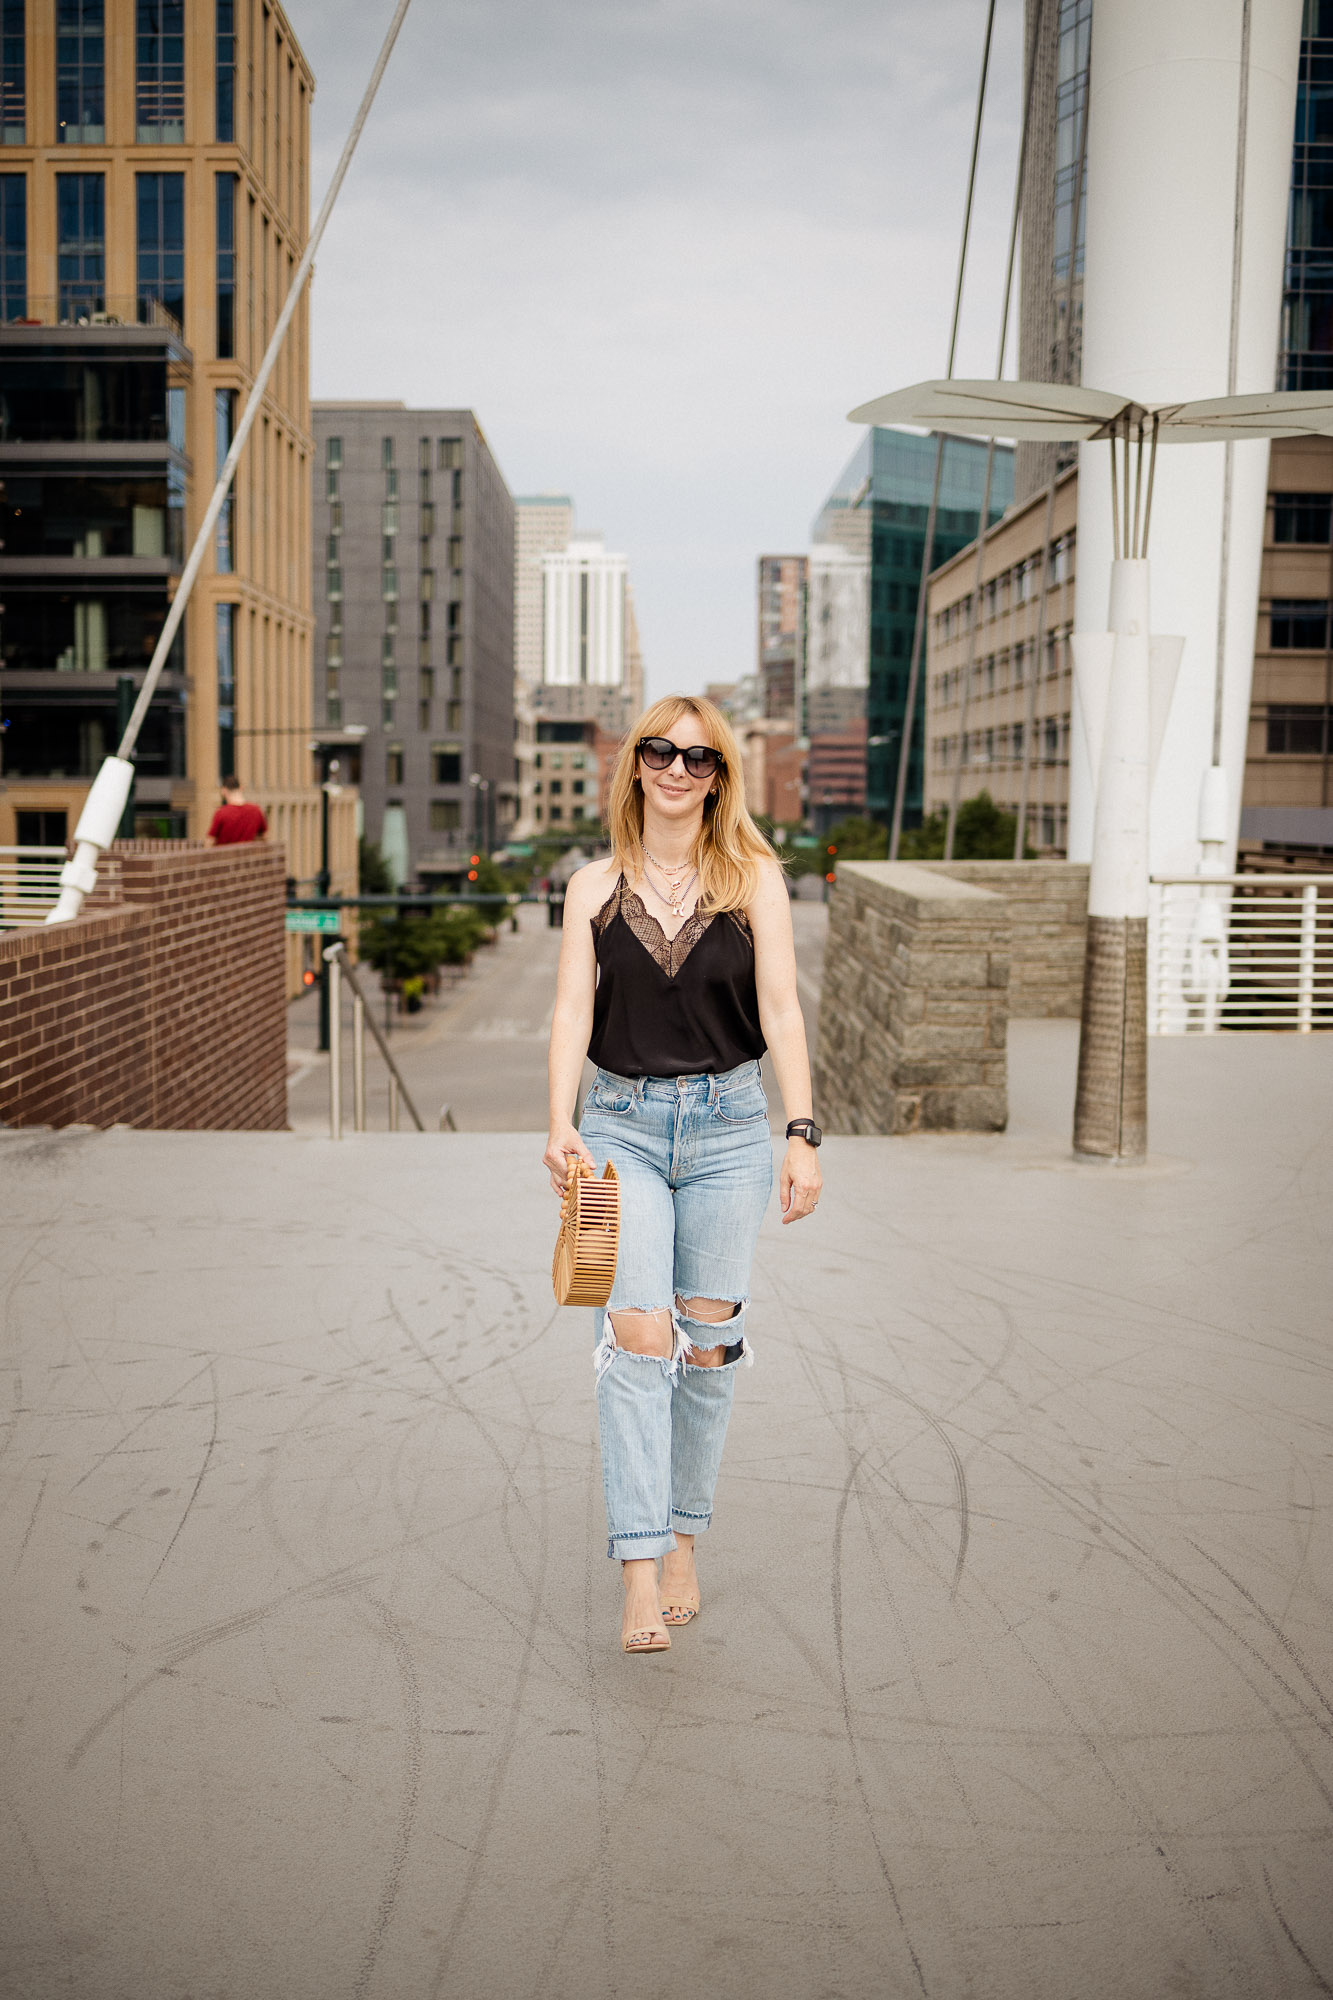 Wearing the black Christy Zadig Voltaire camisole with ripped jeans in downtown Denver.